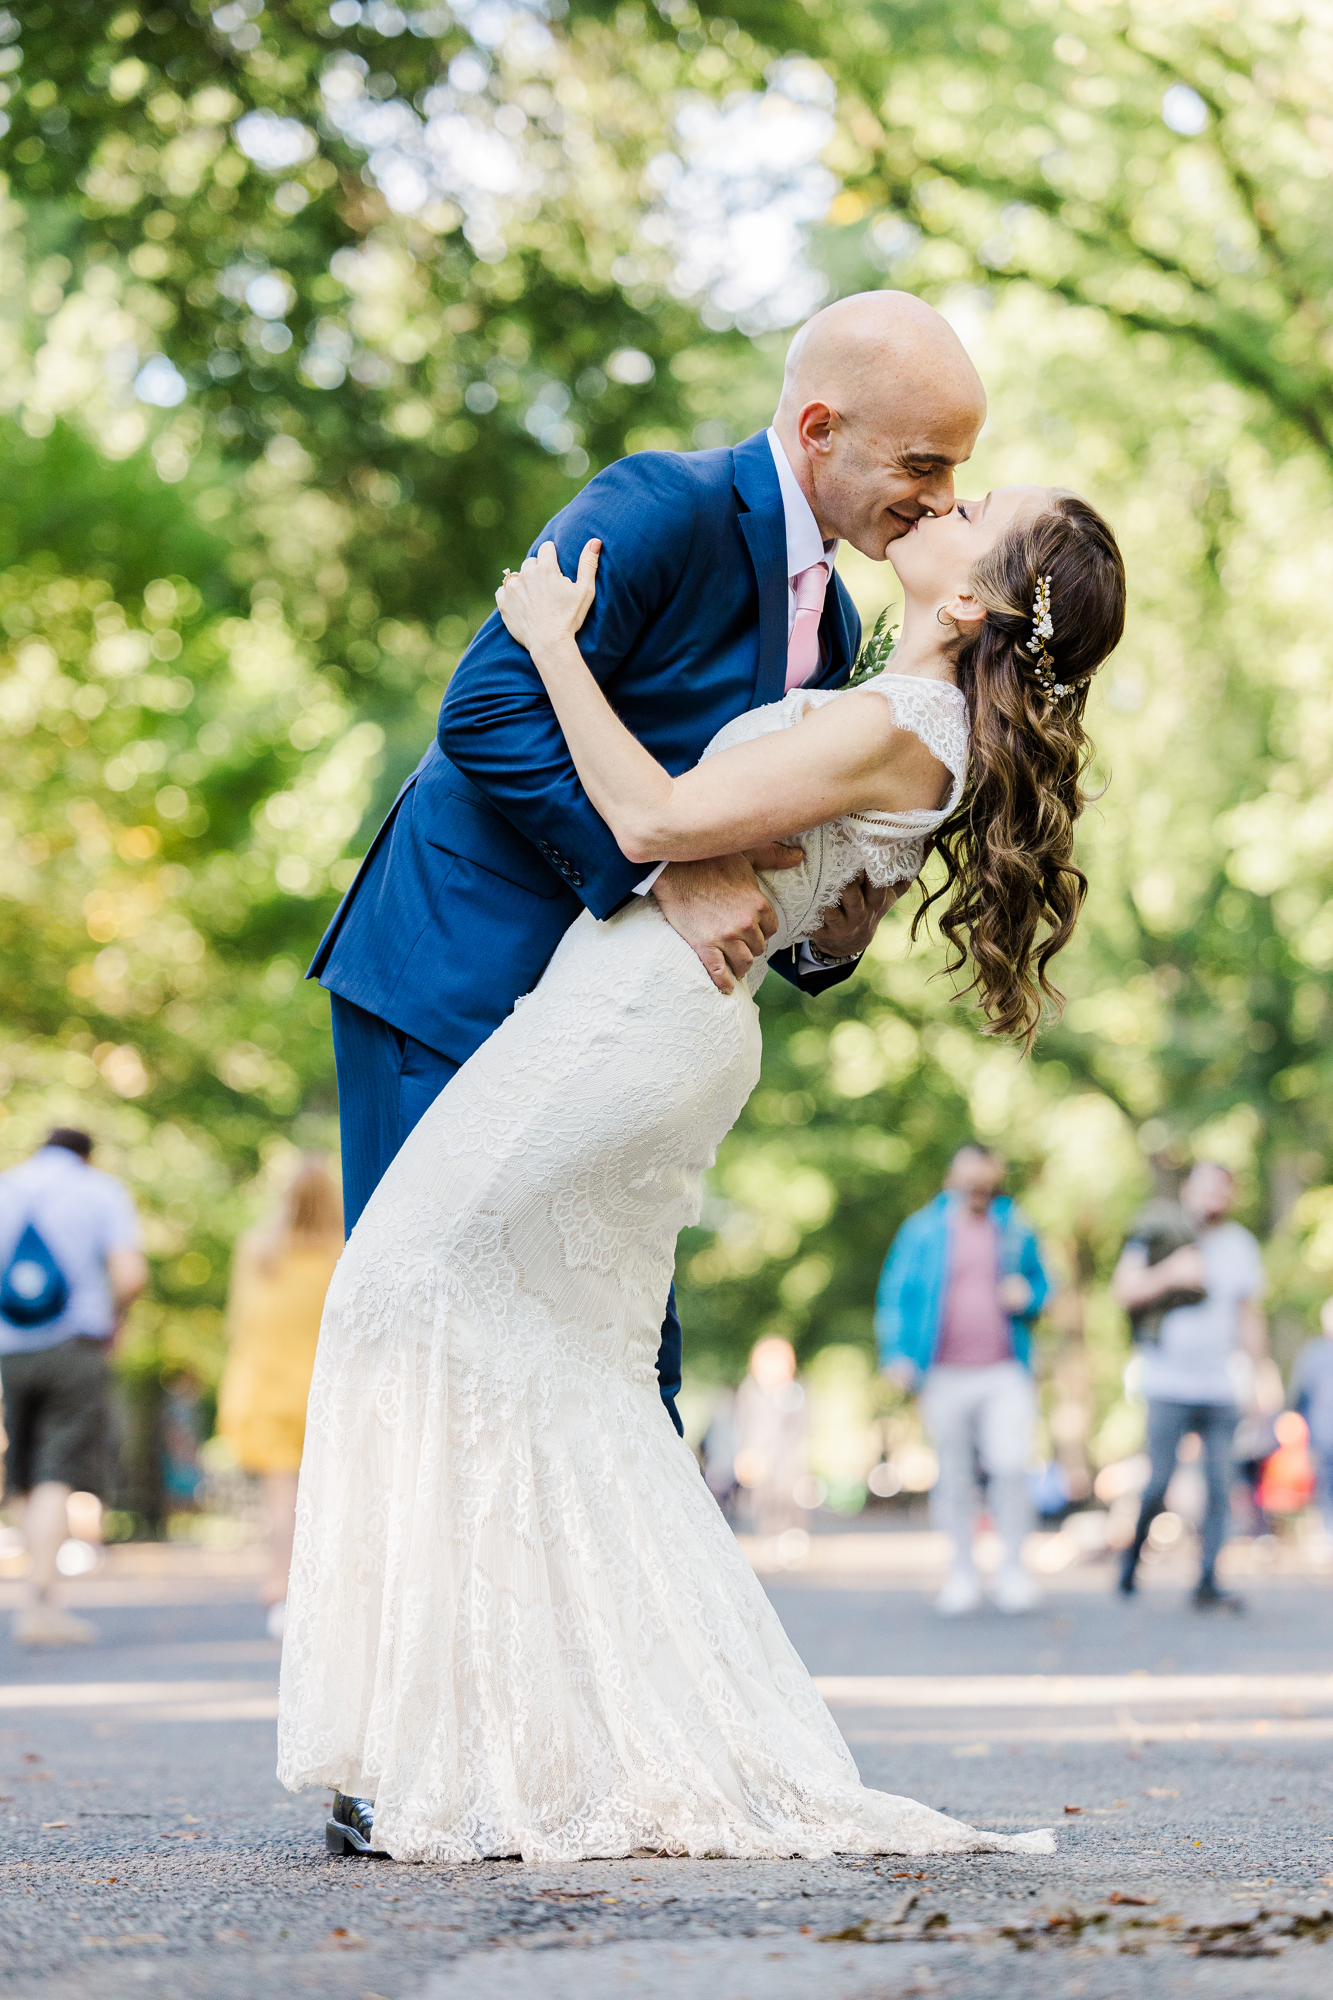 Playful Ladies Pavilion Elopement in NYC